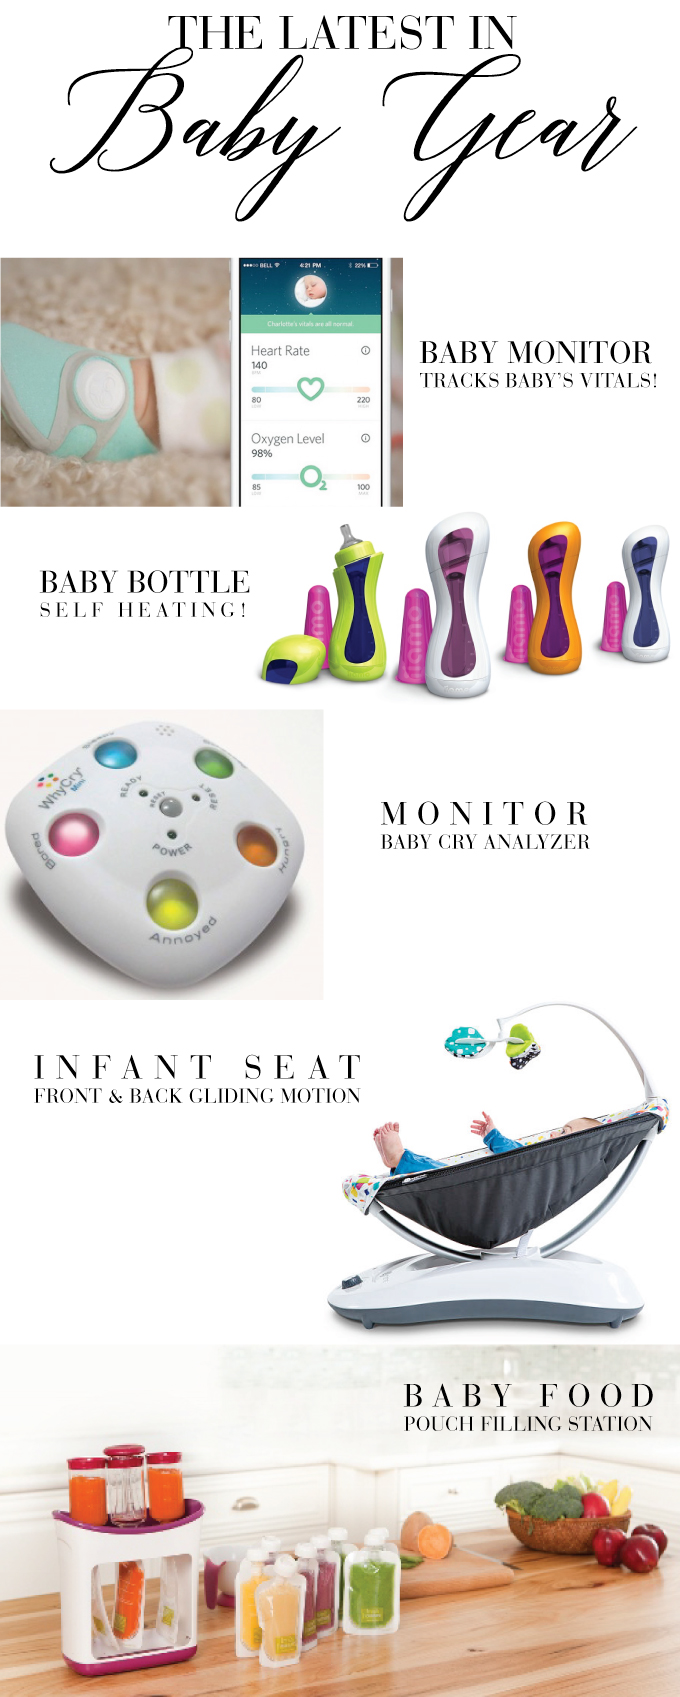 THE-LATEST-BABY-GEAR-